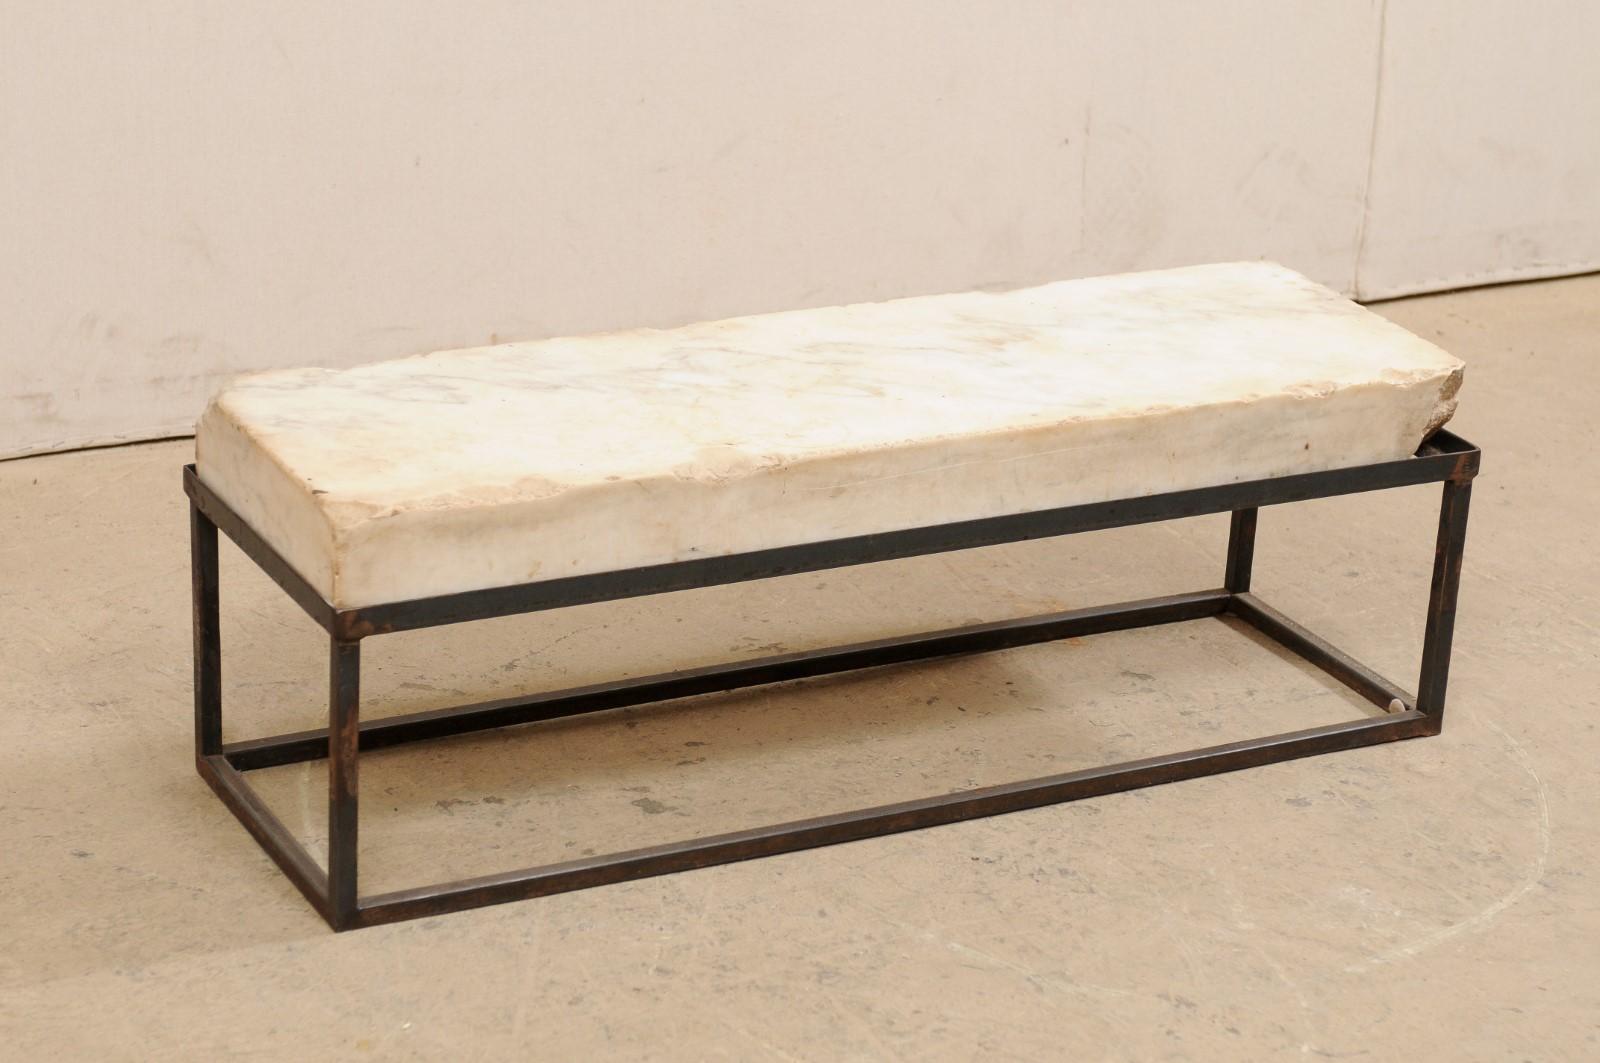 European Thick Marble Slab Top Coffee Table 'or Bench' with New Iron Base 1